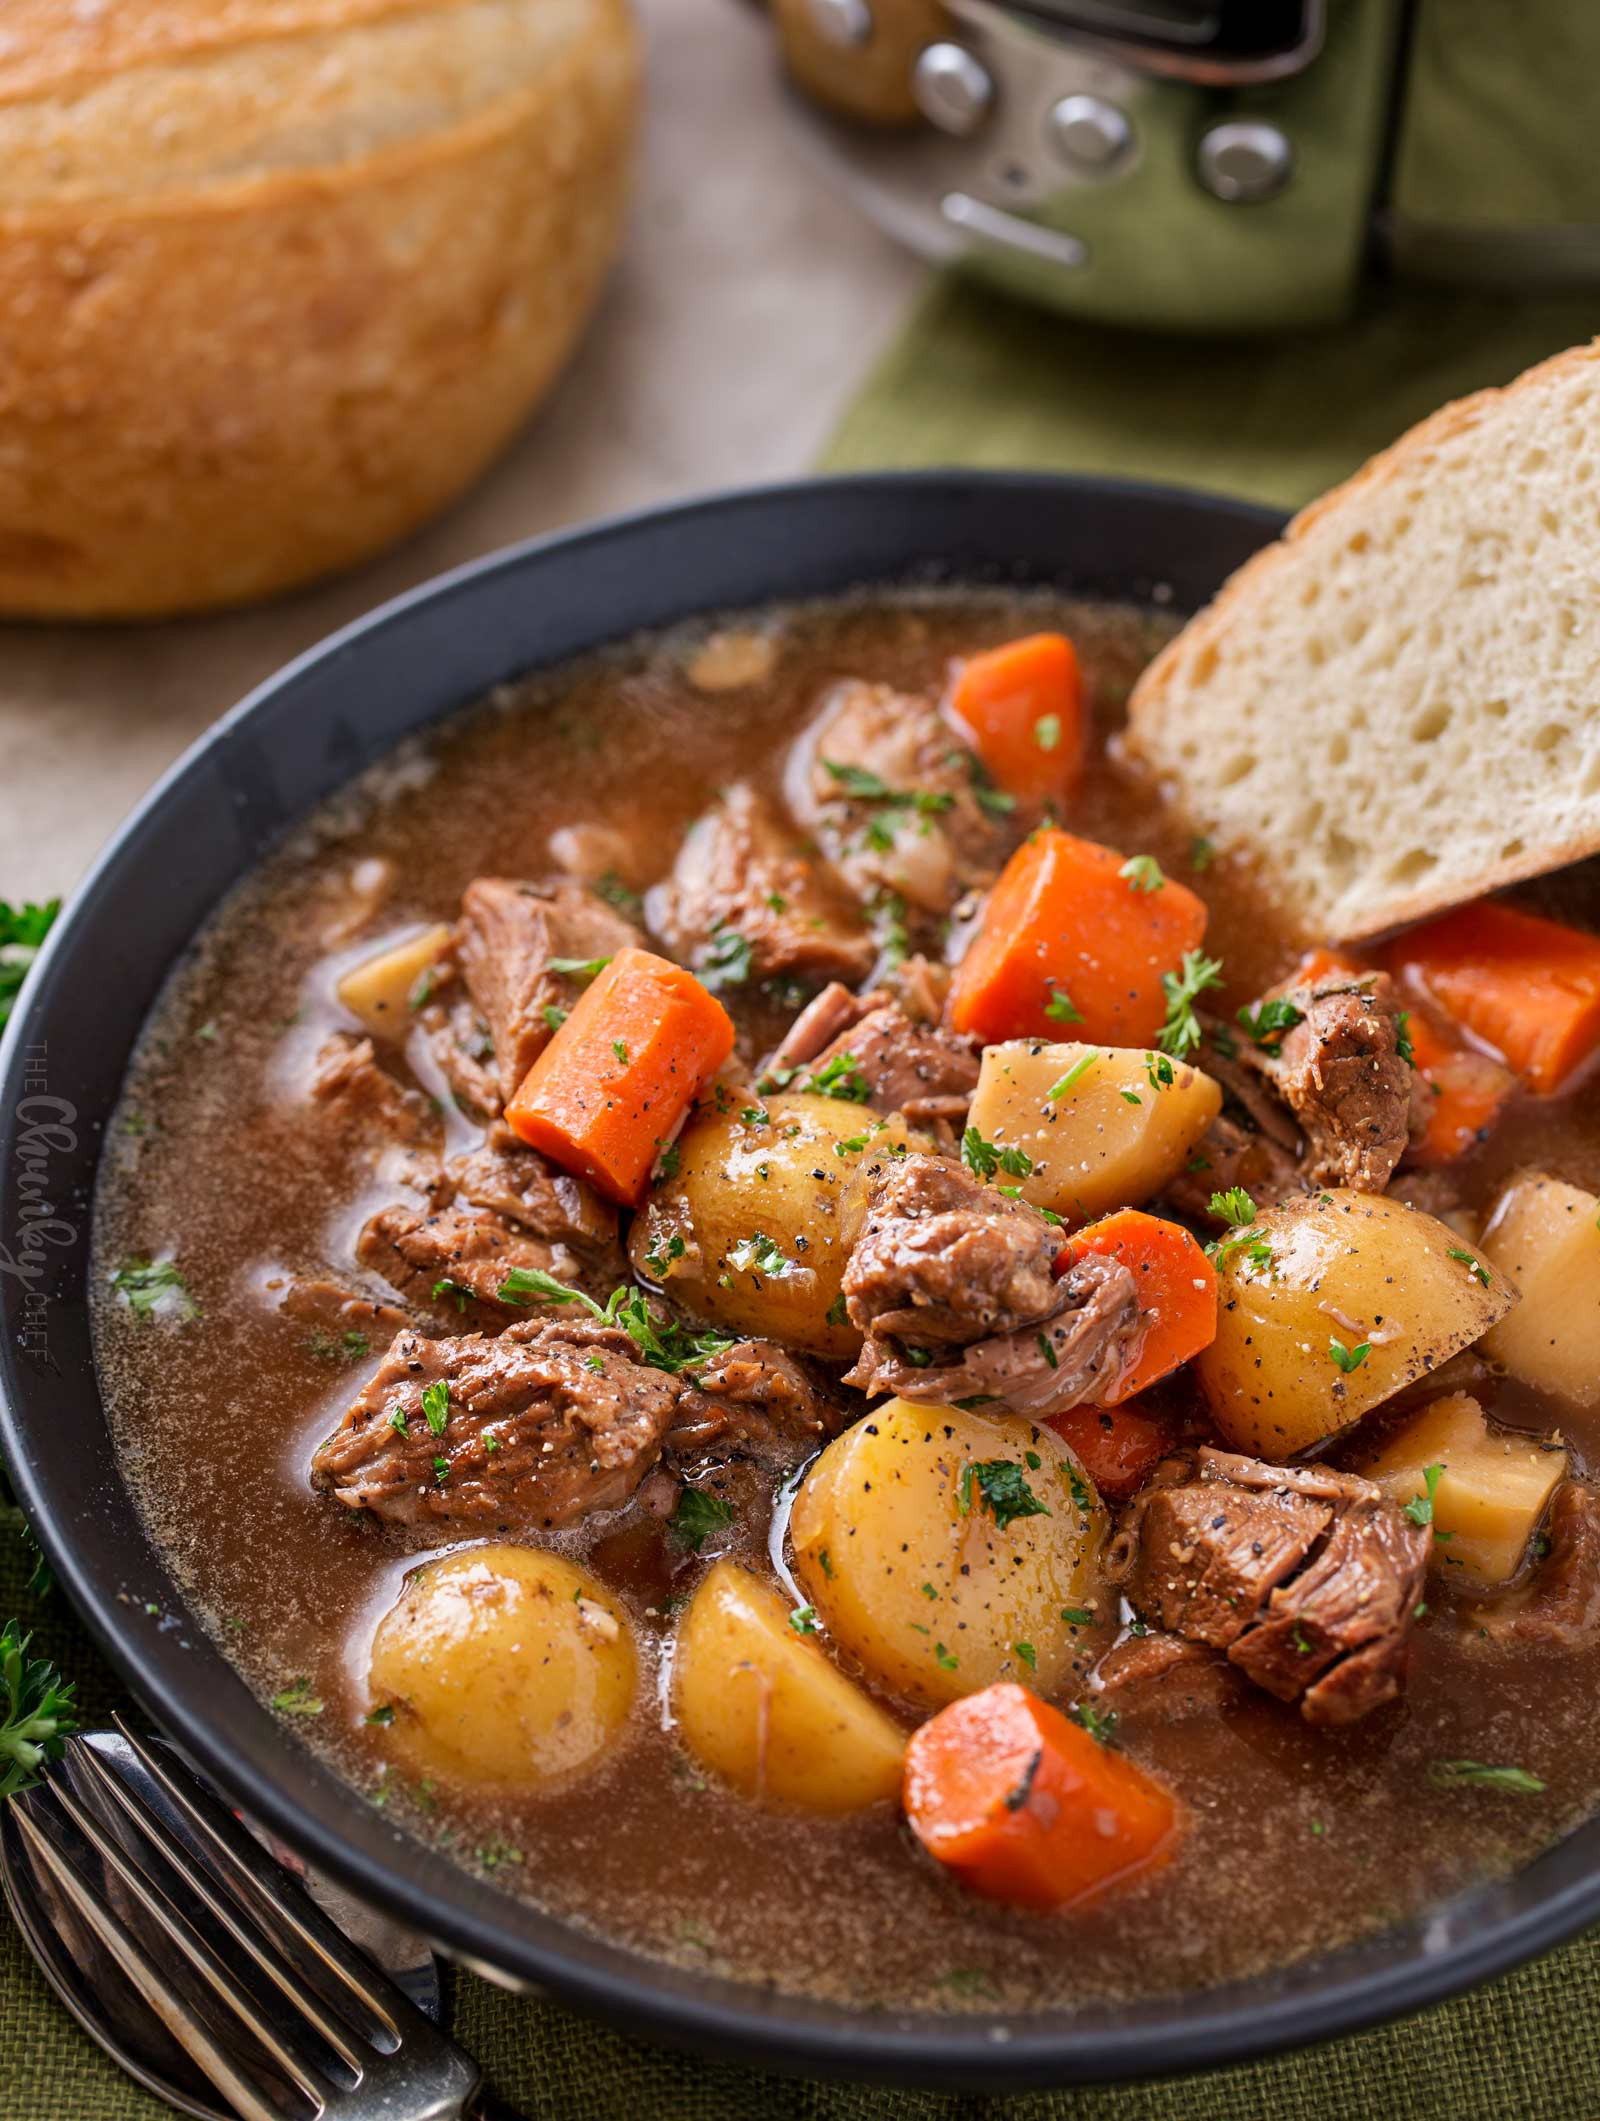 Lamb Stew Slow Cooker Recipe
 Beer and Horseradish Slow Cooker Beef Stew The Chunky Chef